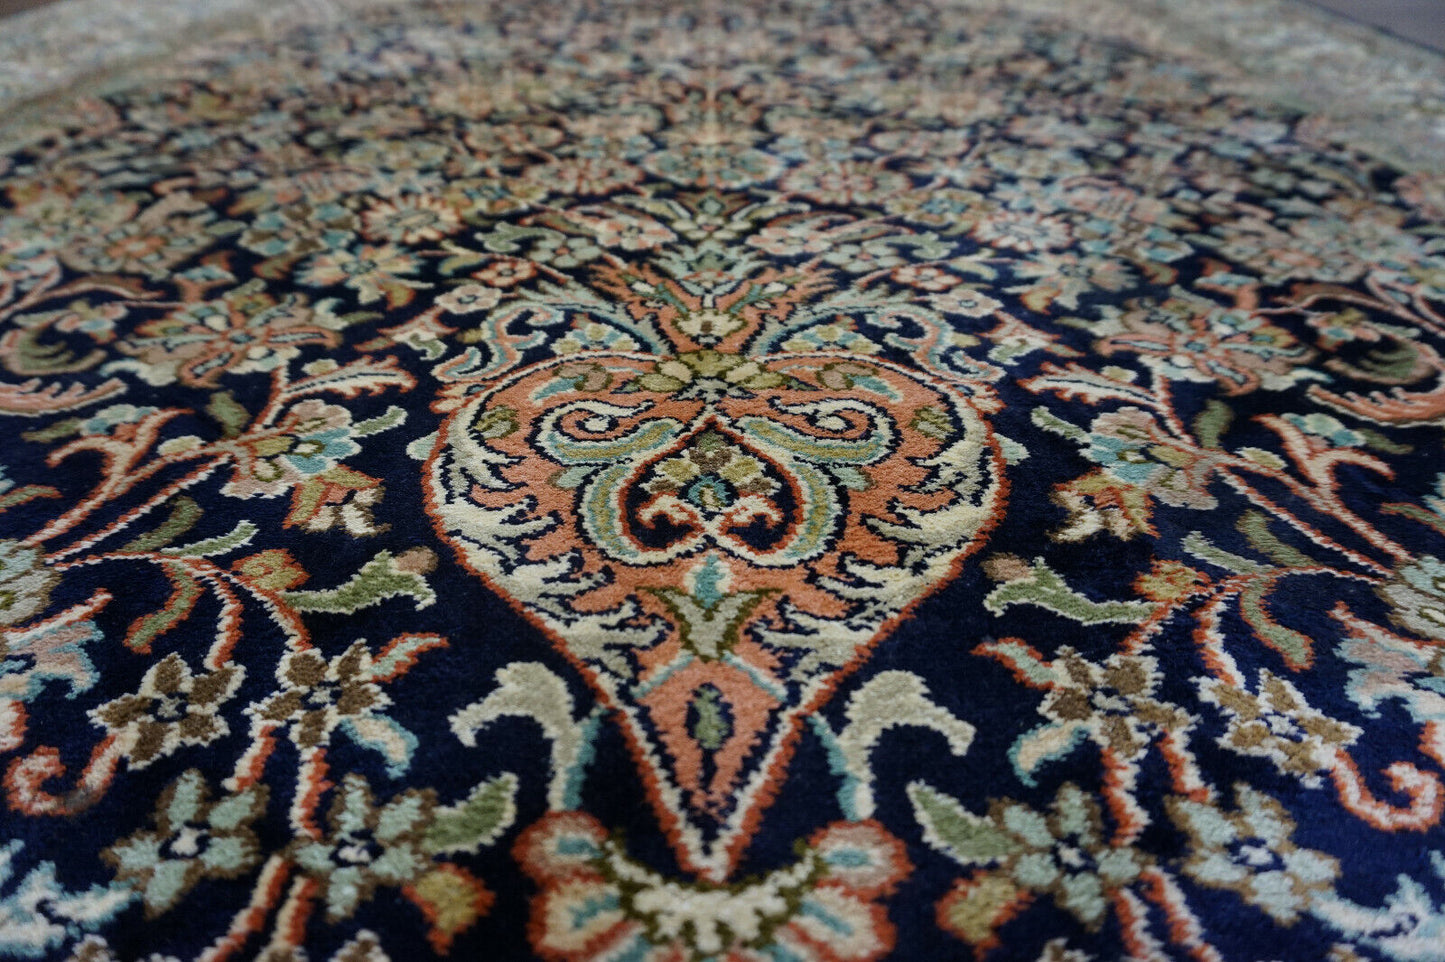  Close-up of the revered Tree of Life motif on the Handmade Vintage Persian Kashmir Rug